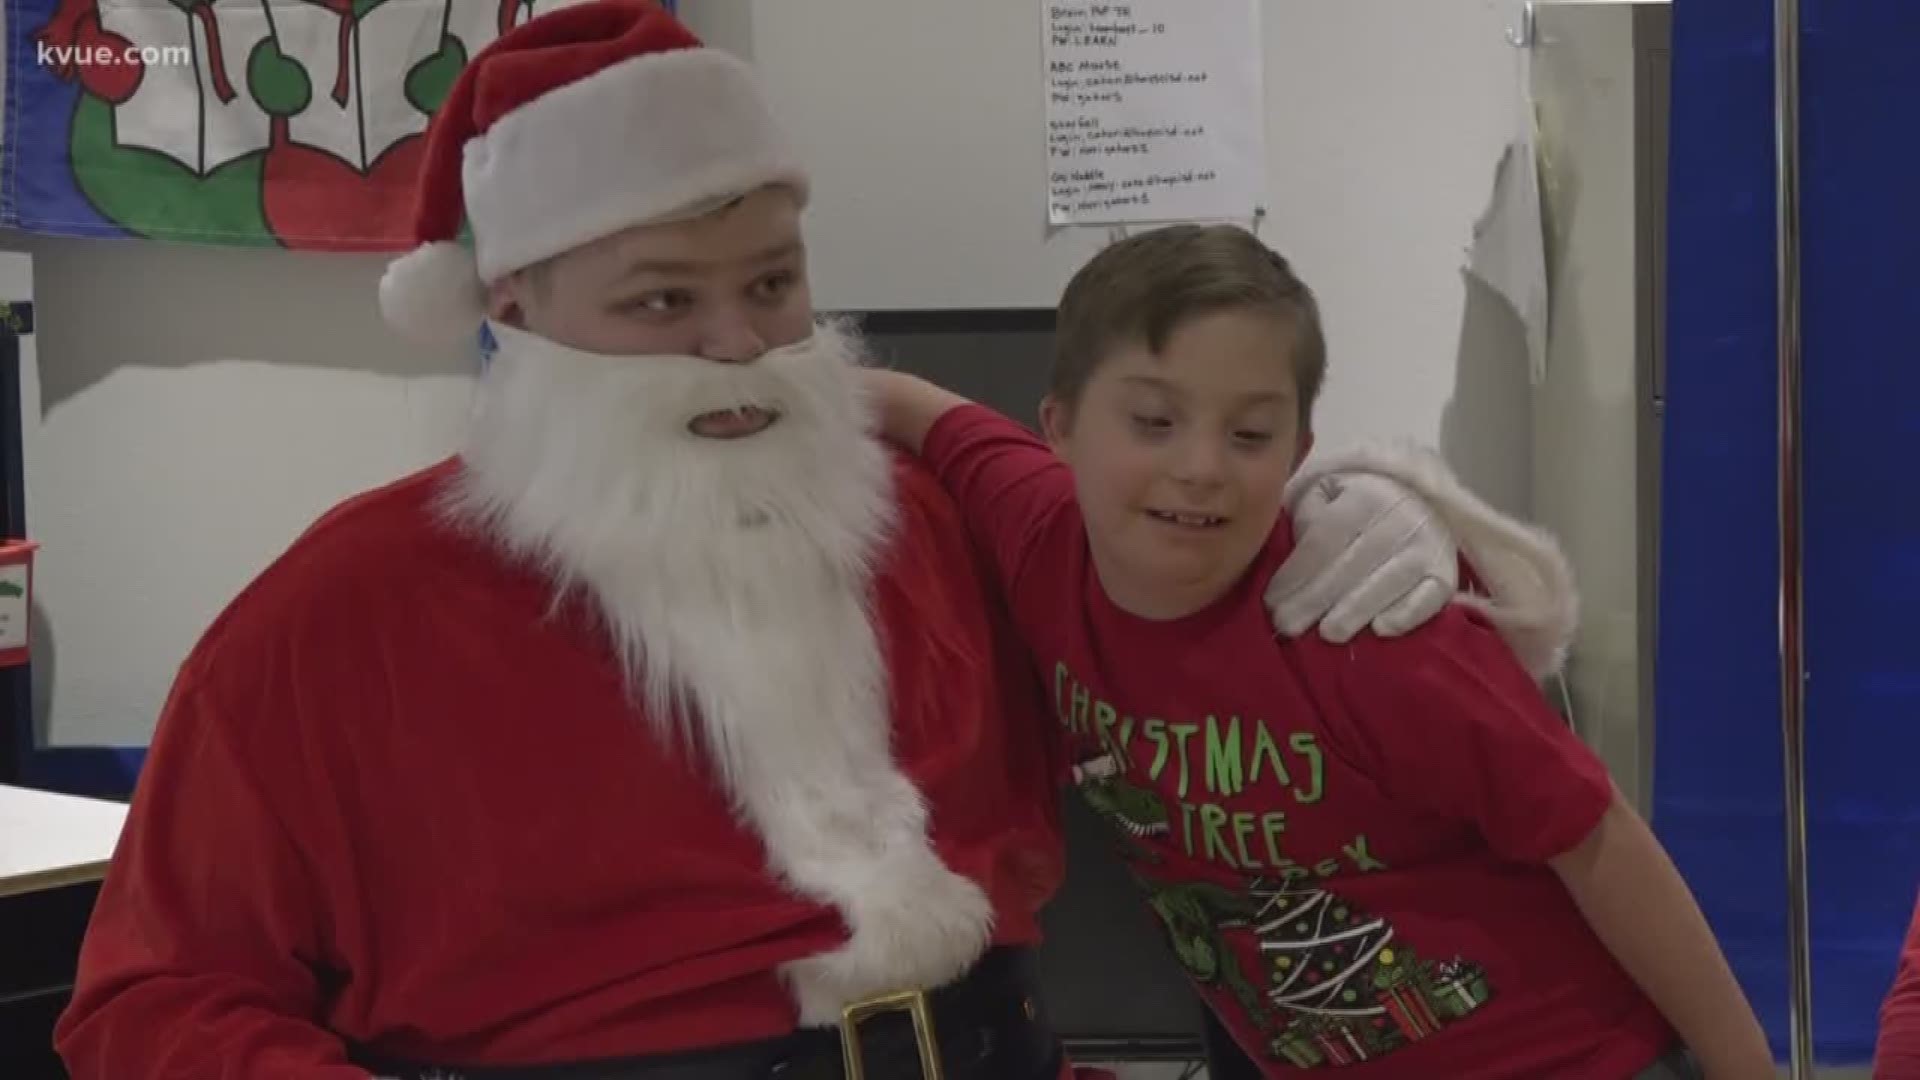 In the spirit of the holidays, a Hays County special needs high school student decided to dress up as Santa Claus and visit Foundational Learning classes at Fuentes Elementary.